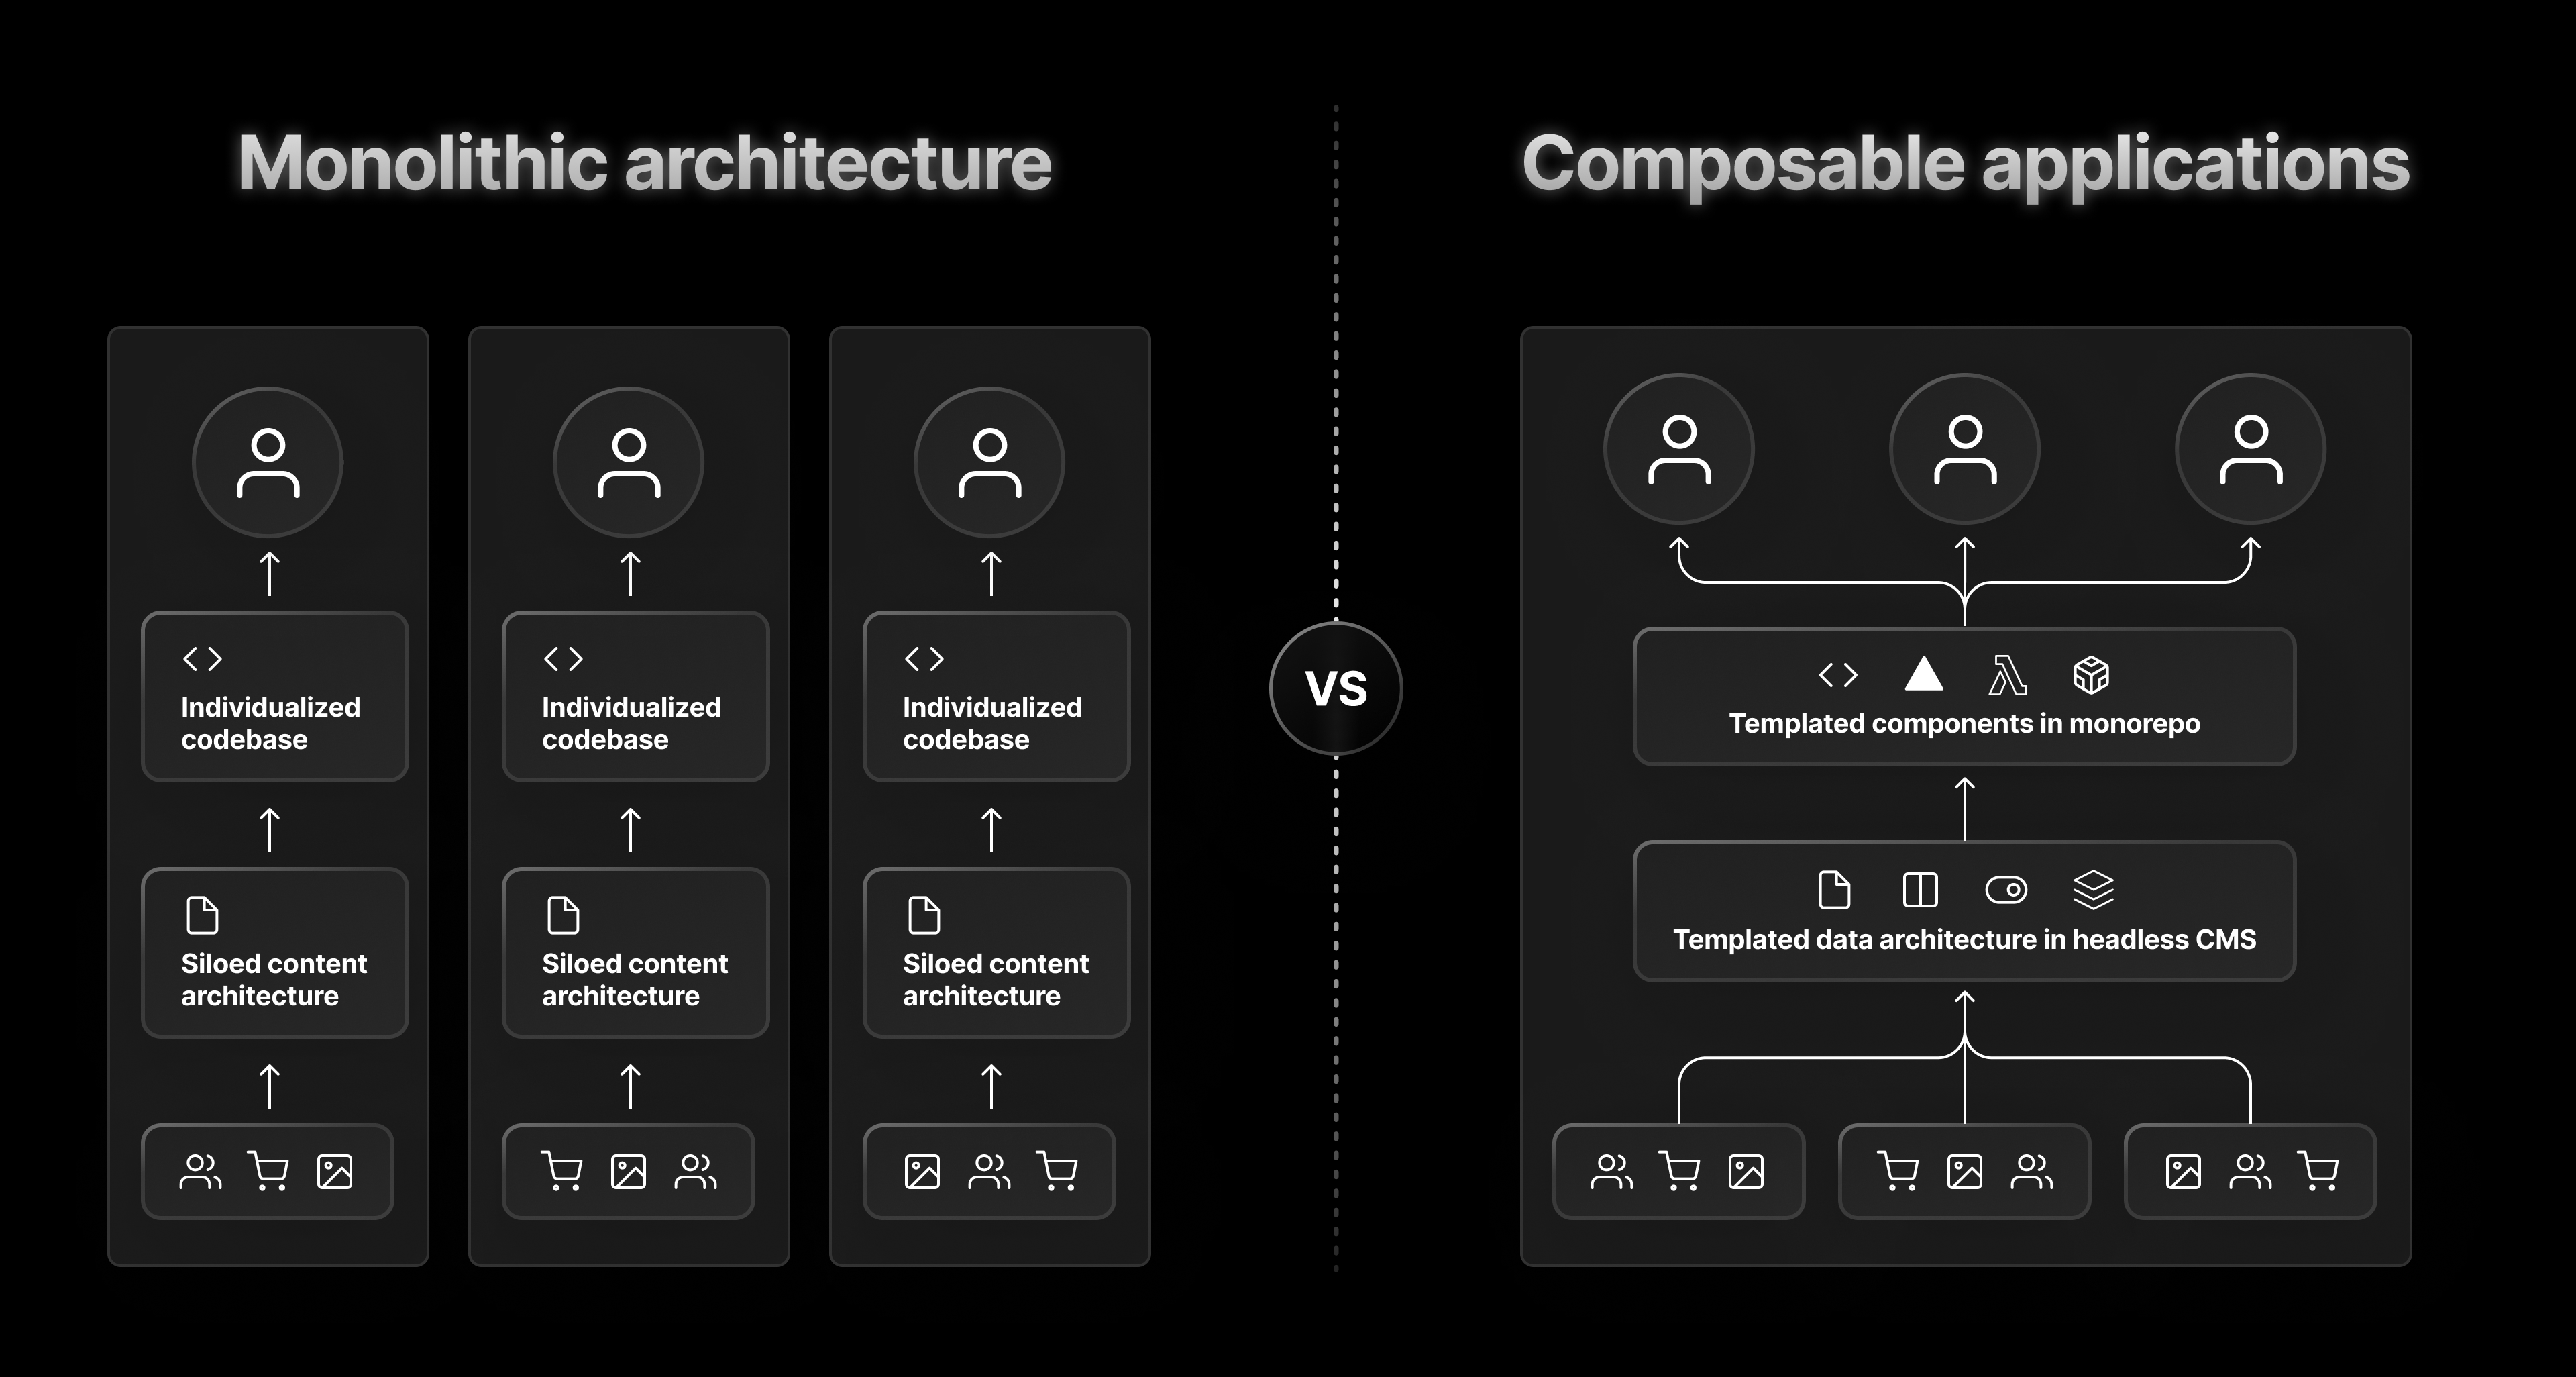 Monolithic architecture often requires repetition of labor, but the flexibility of composable allows for data templating that works for all clients.